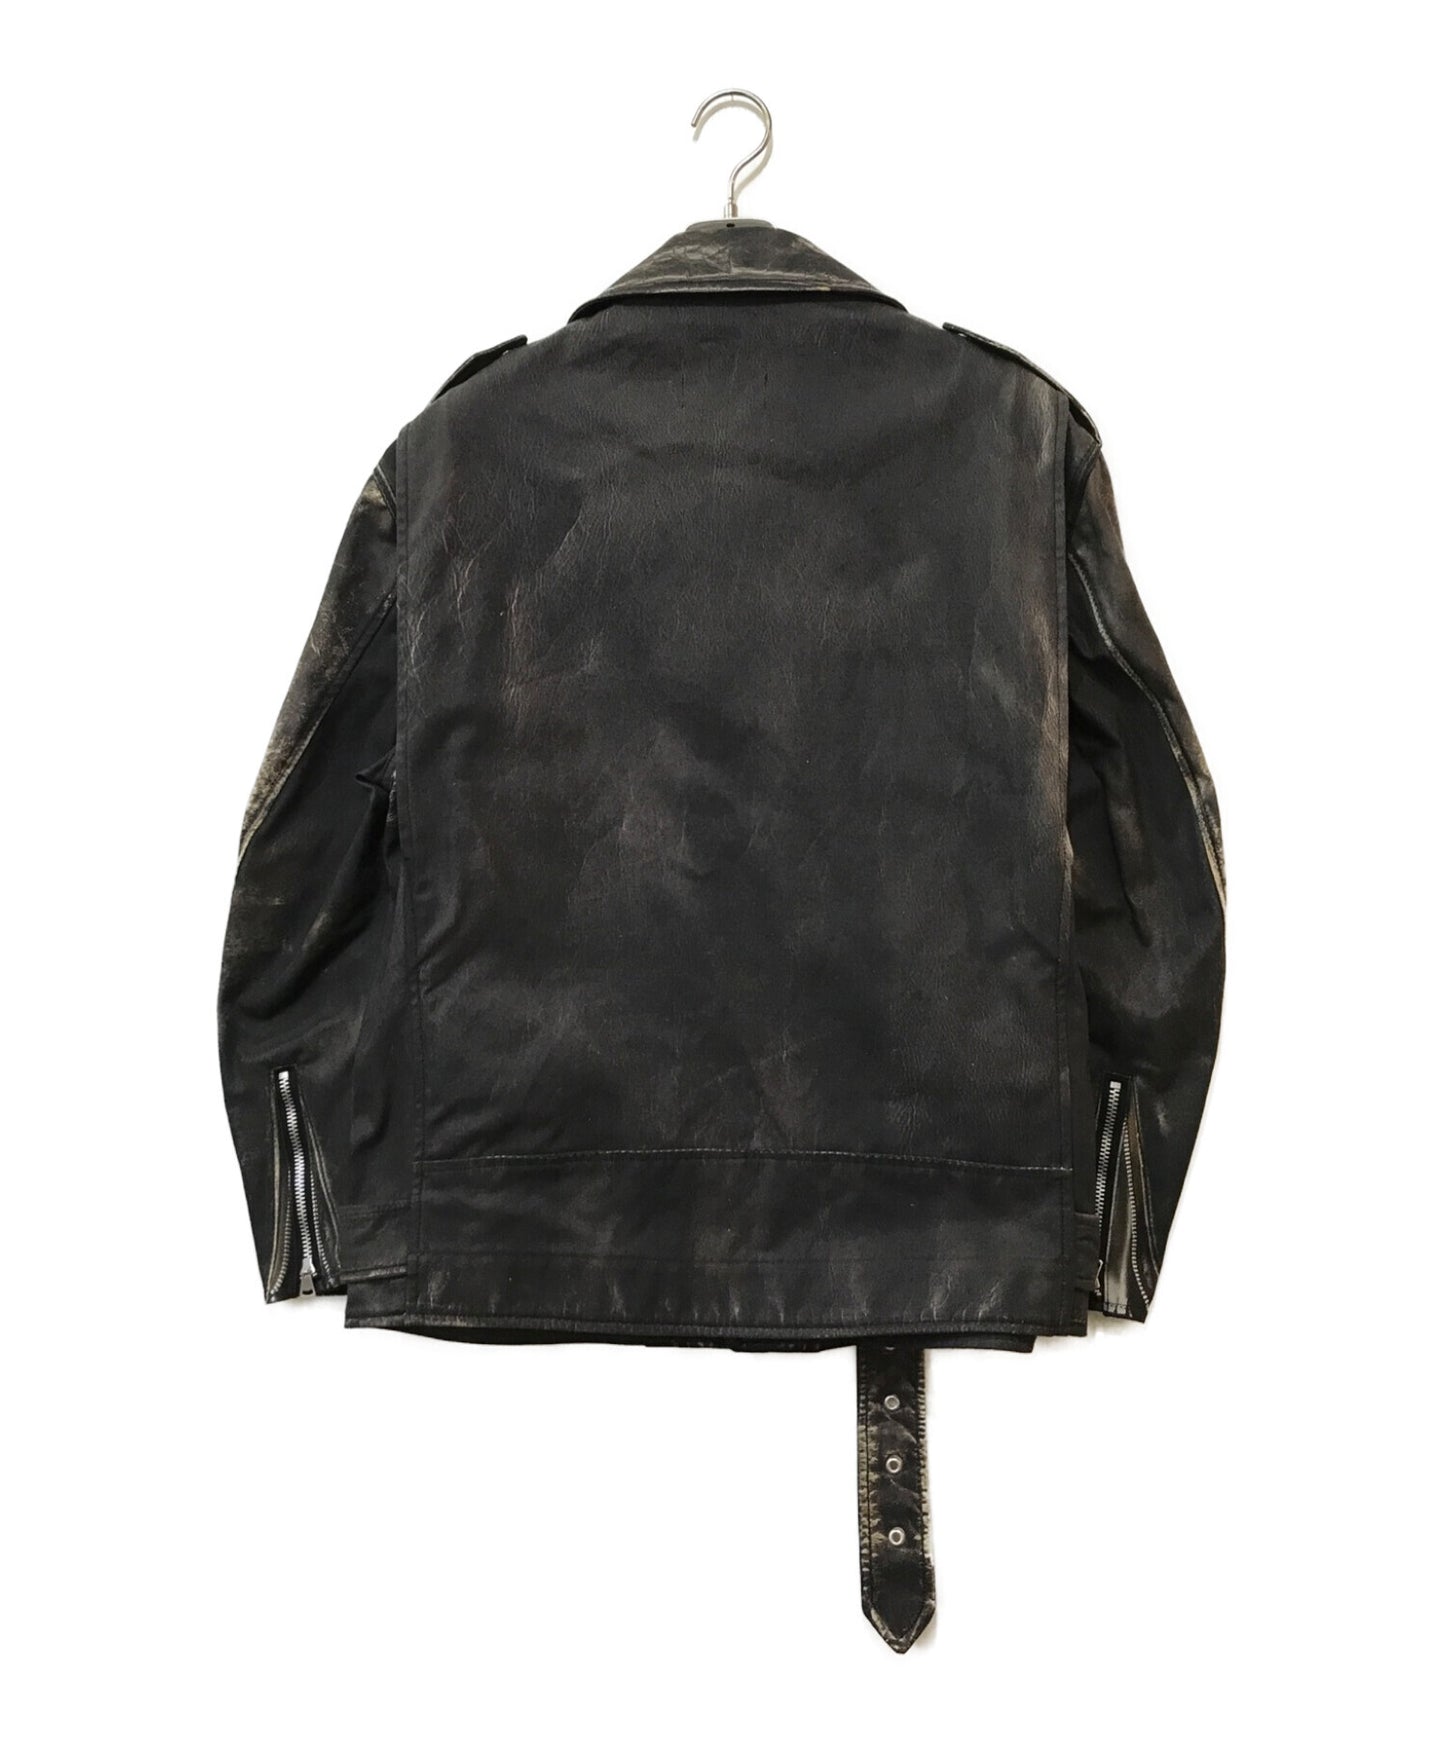 [Pre-owned] eYe COMME des GARCONS JUNYAWATANABE MAN Transfer Double Riders Jacket WI-J908